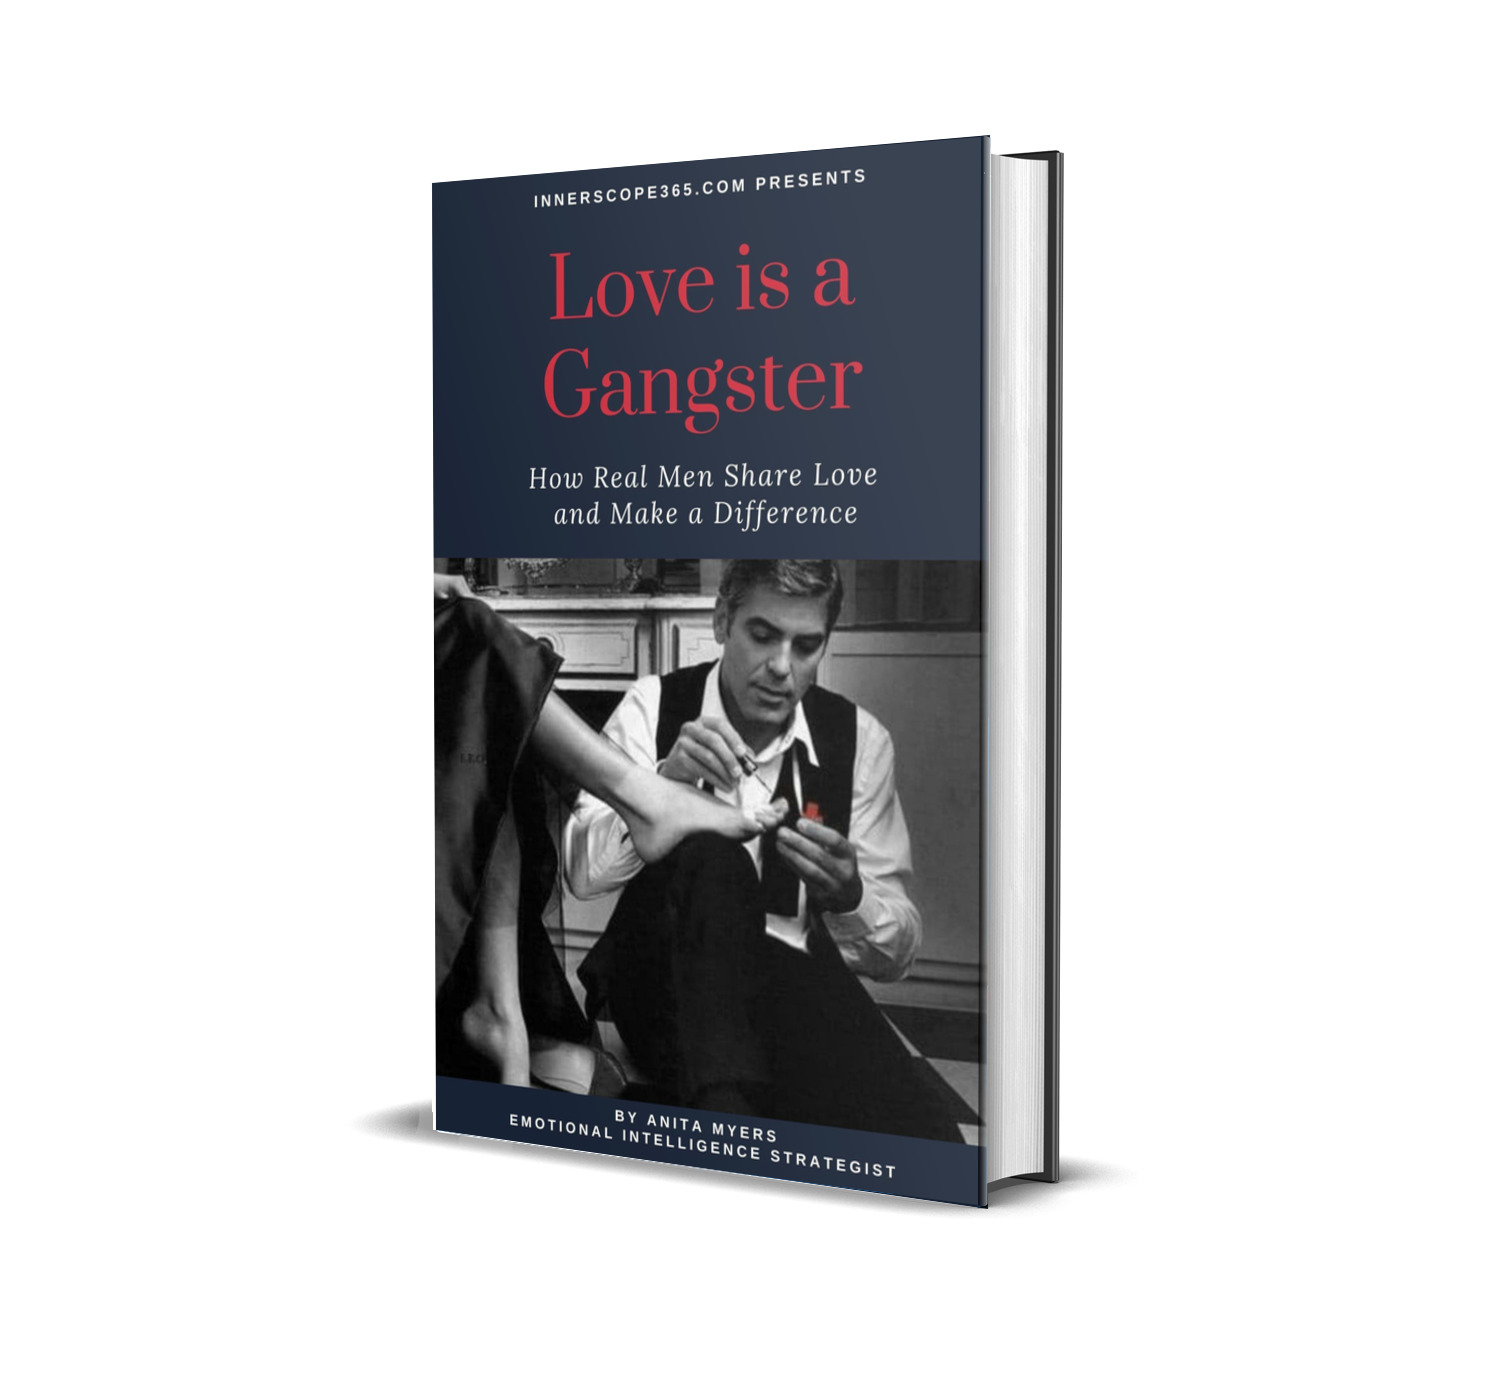 Love is a Gangster book cover